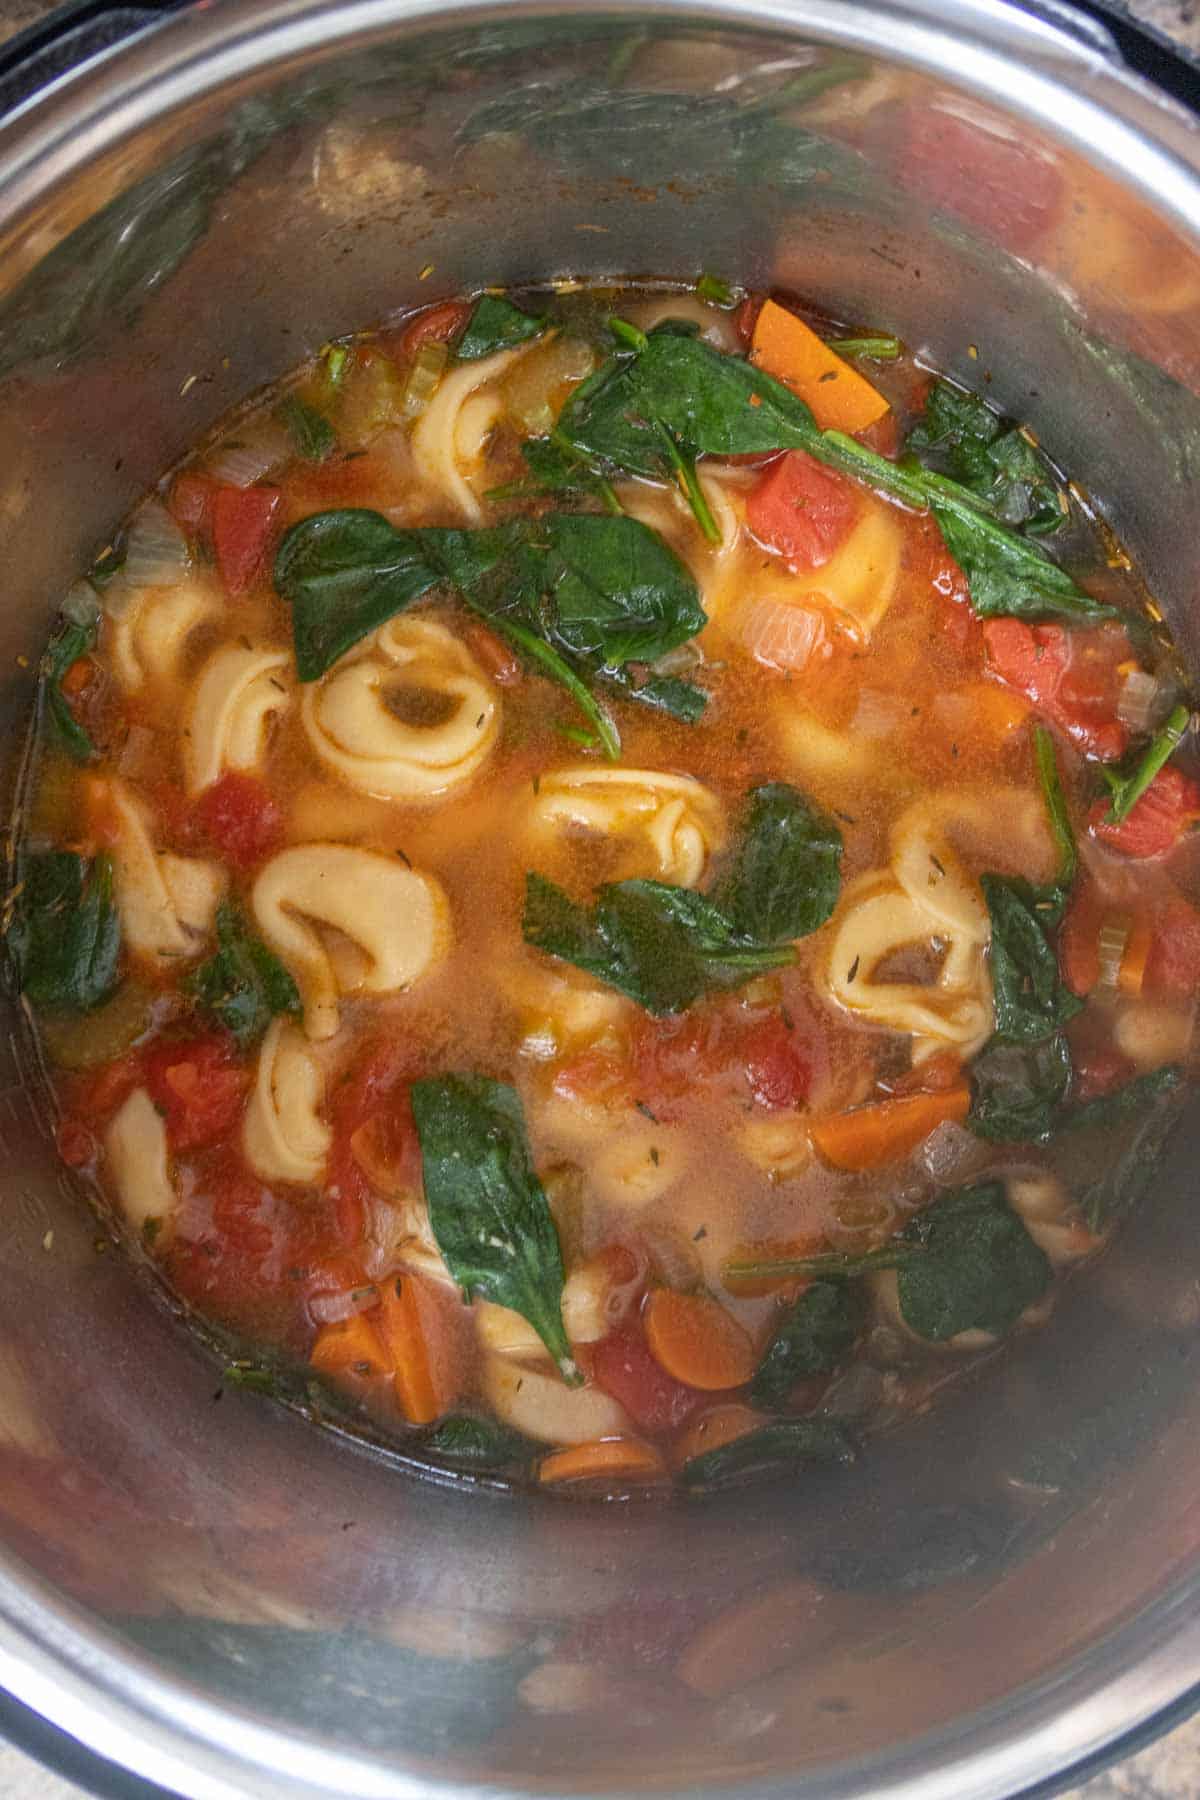 Instant pot filled with tortellini soup.